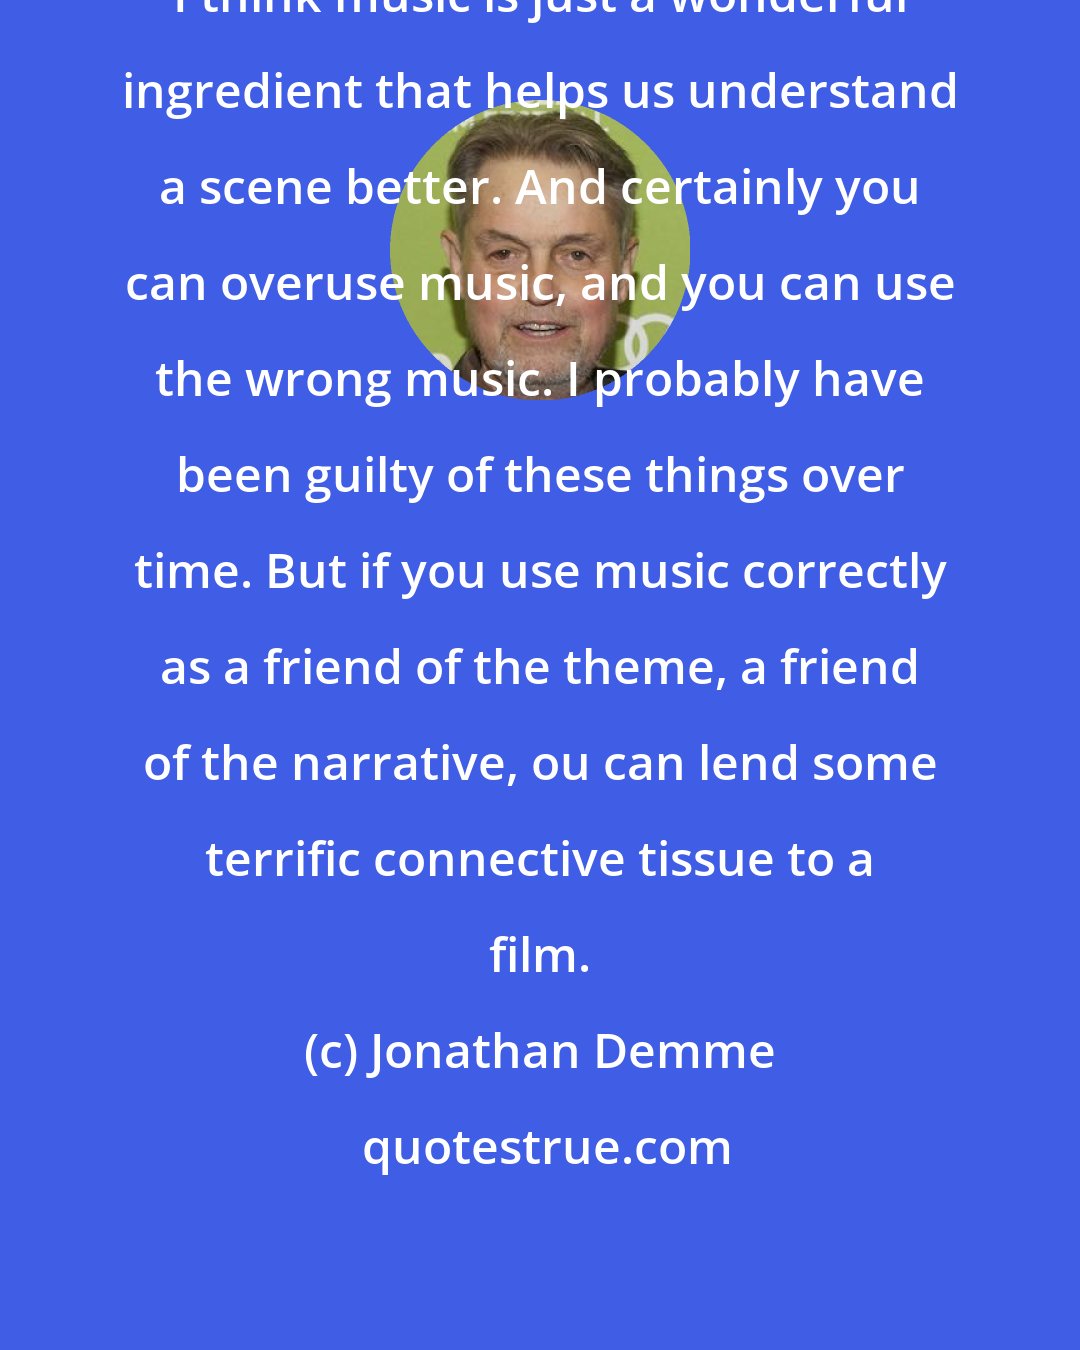 Jonathan Demme: I think music is just a wonderful ingredient that helps us understand a scene better. And certainly you can overuse music, and you can use the wrong music. I probably have been guilty of these things over time. But if you use music correctly as a friend of the theme, a friend of the narrative, ou can lend some terrific connective tissue to a film.